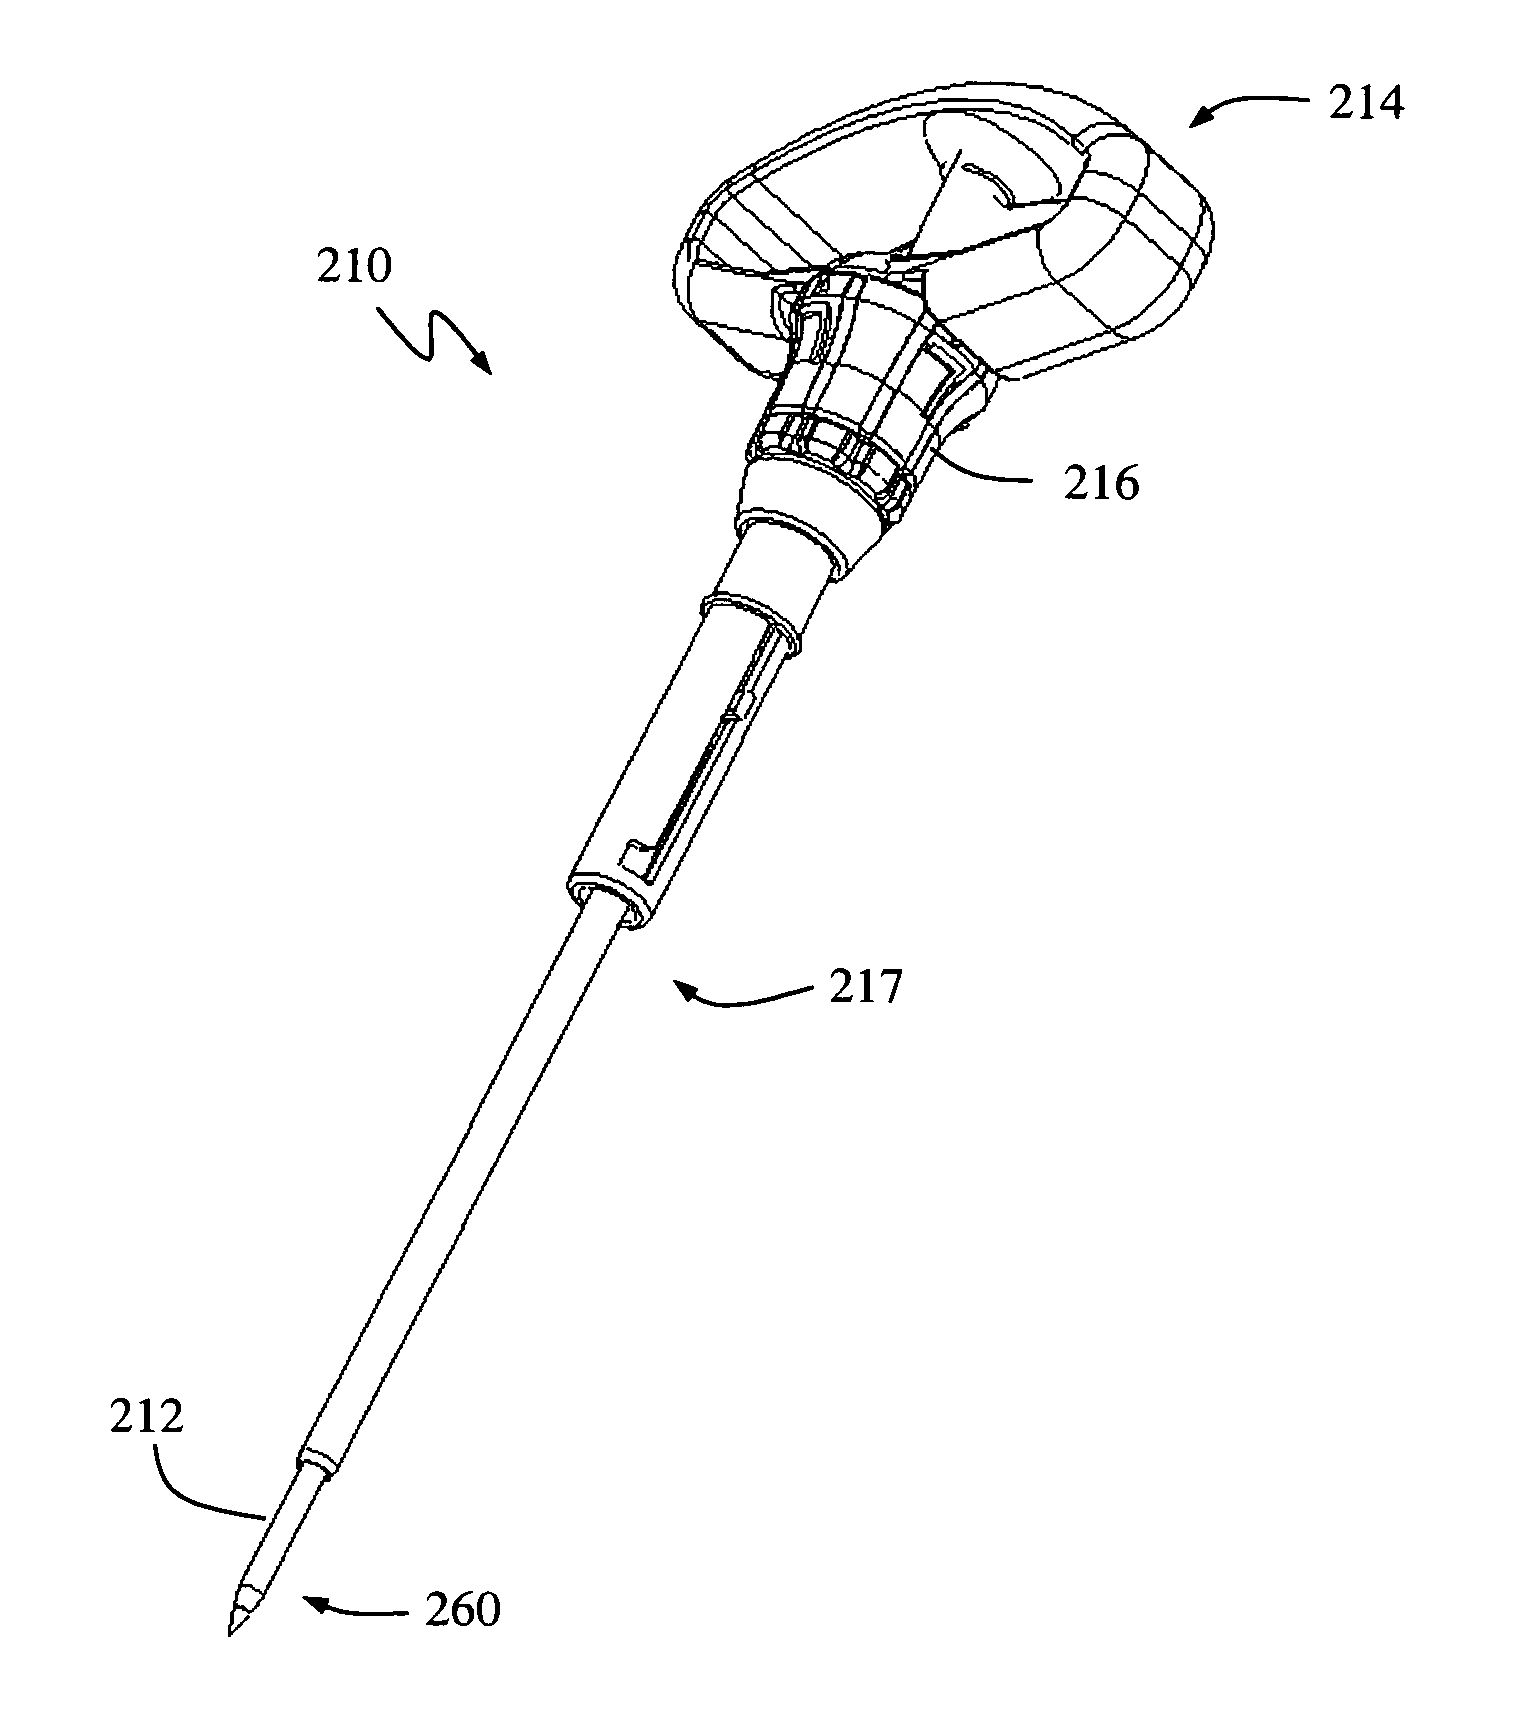 Insulated pedicle access system and related methods